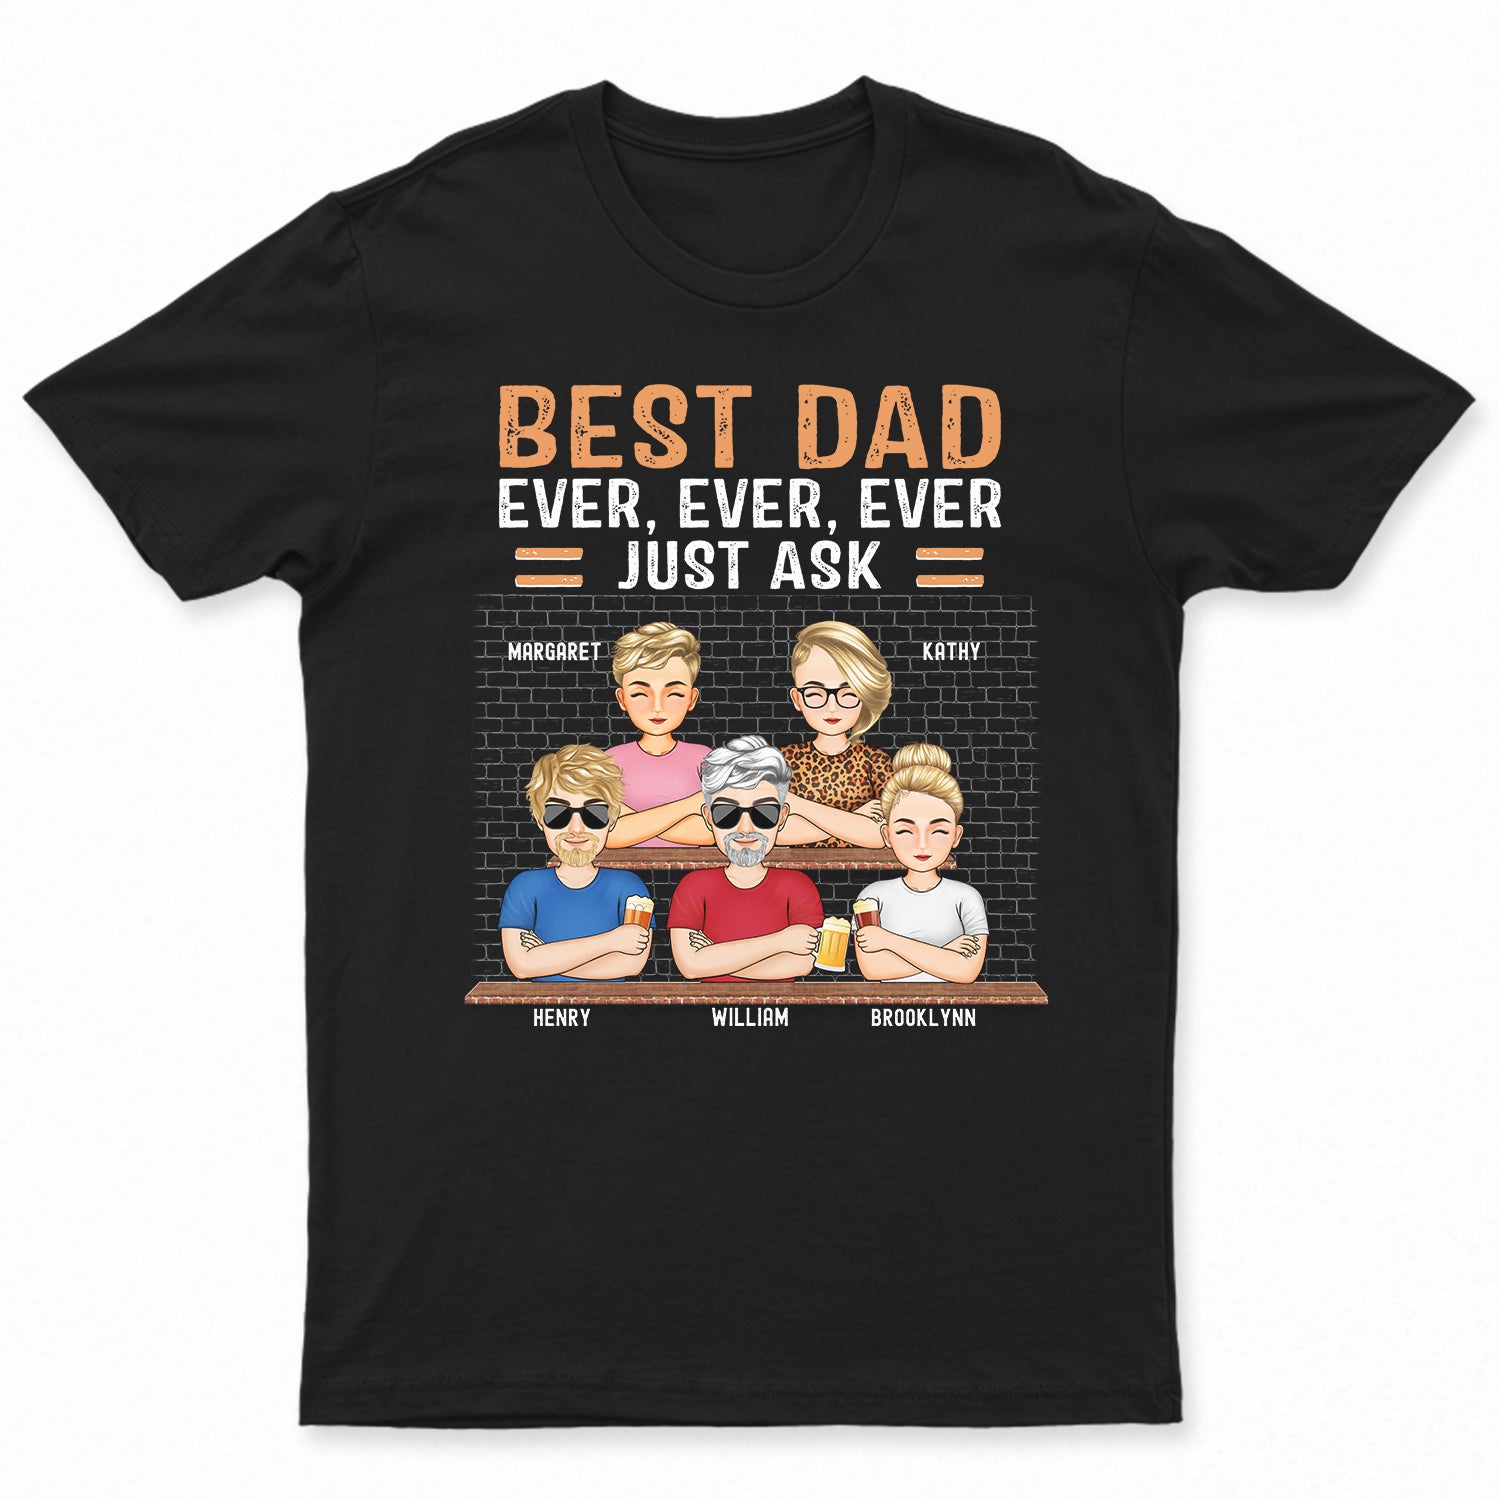 Best Dad Ever Ever Ever Just Ask - Birthday, Loving Gift For Daddy, Father, Grandpa, Grandfather - Personalized Custom T Shirt